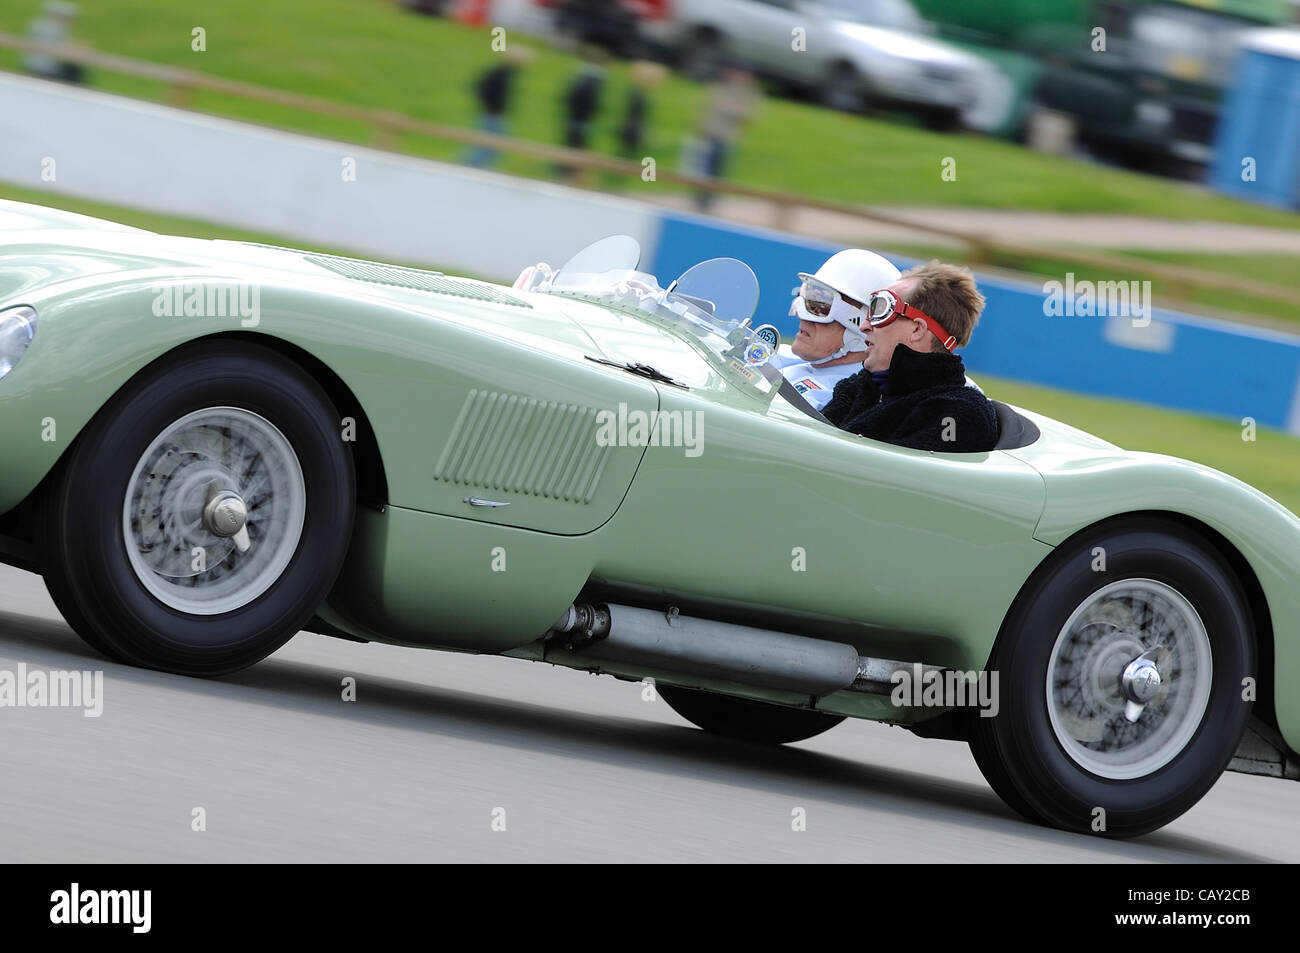 6th May 2012, Donington Park Racing Circuit, UK.  Sir Stirling Moss drives his race winning 1952 Jaguar C-Type XKC 005, with a competition winner as passenger.  Sir Stirling was given special permission to wear this period helmet and goggles. Stock Photo